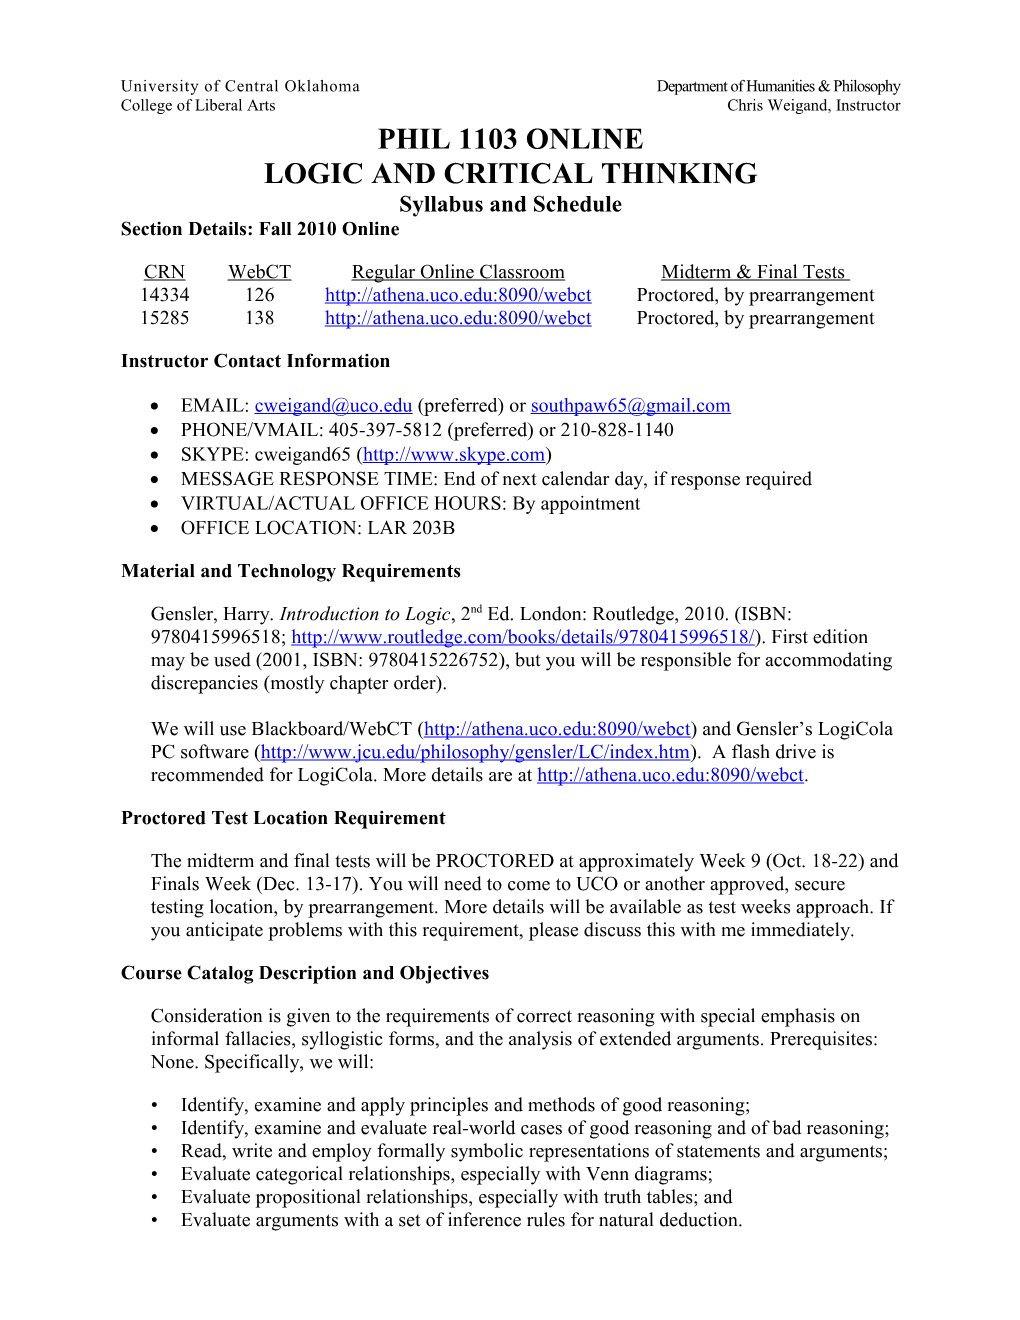 LOGIC and CRITICAL THINKING Syllabus and Schedule